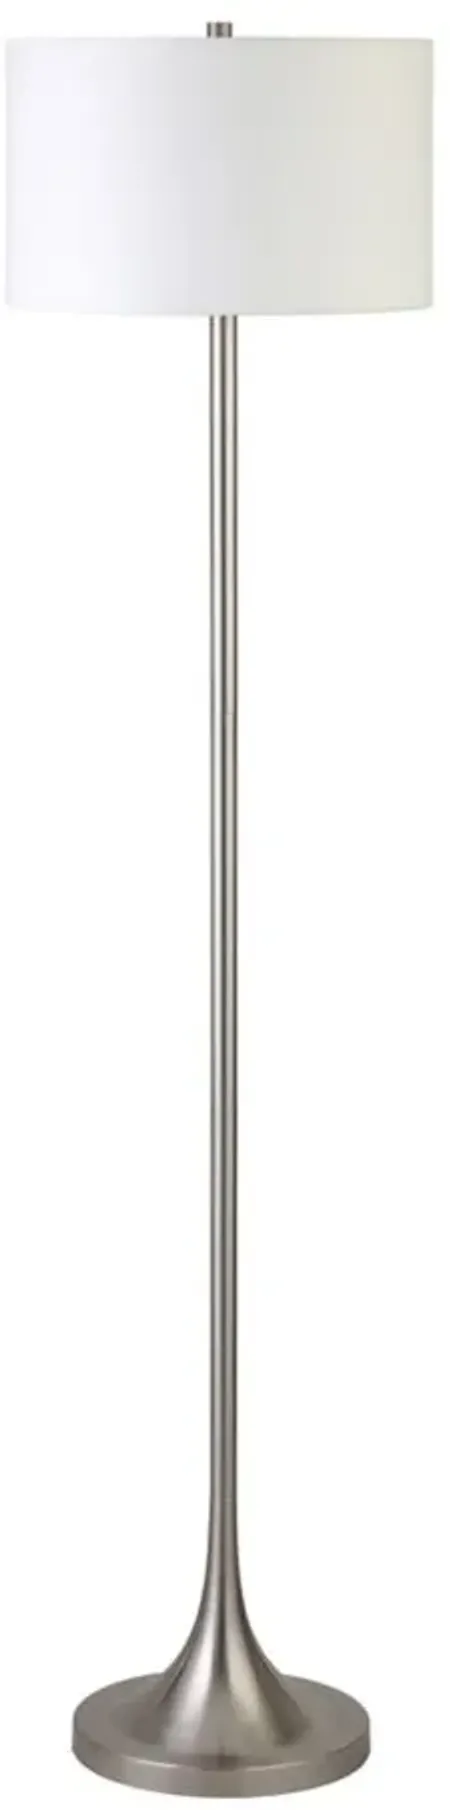 Andrea Floor Lamp in Brushed Nickel by Hudson & Canal